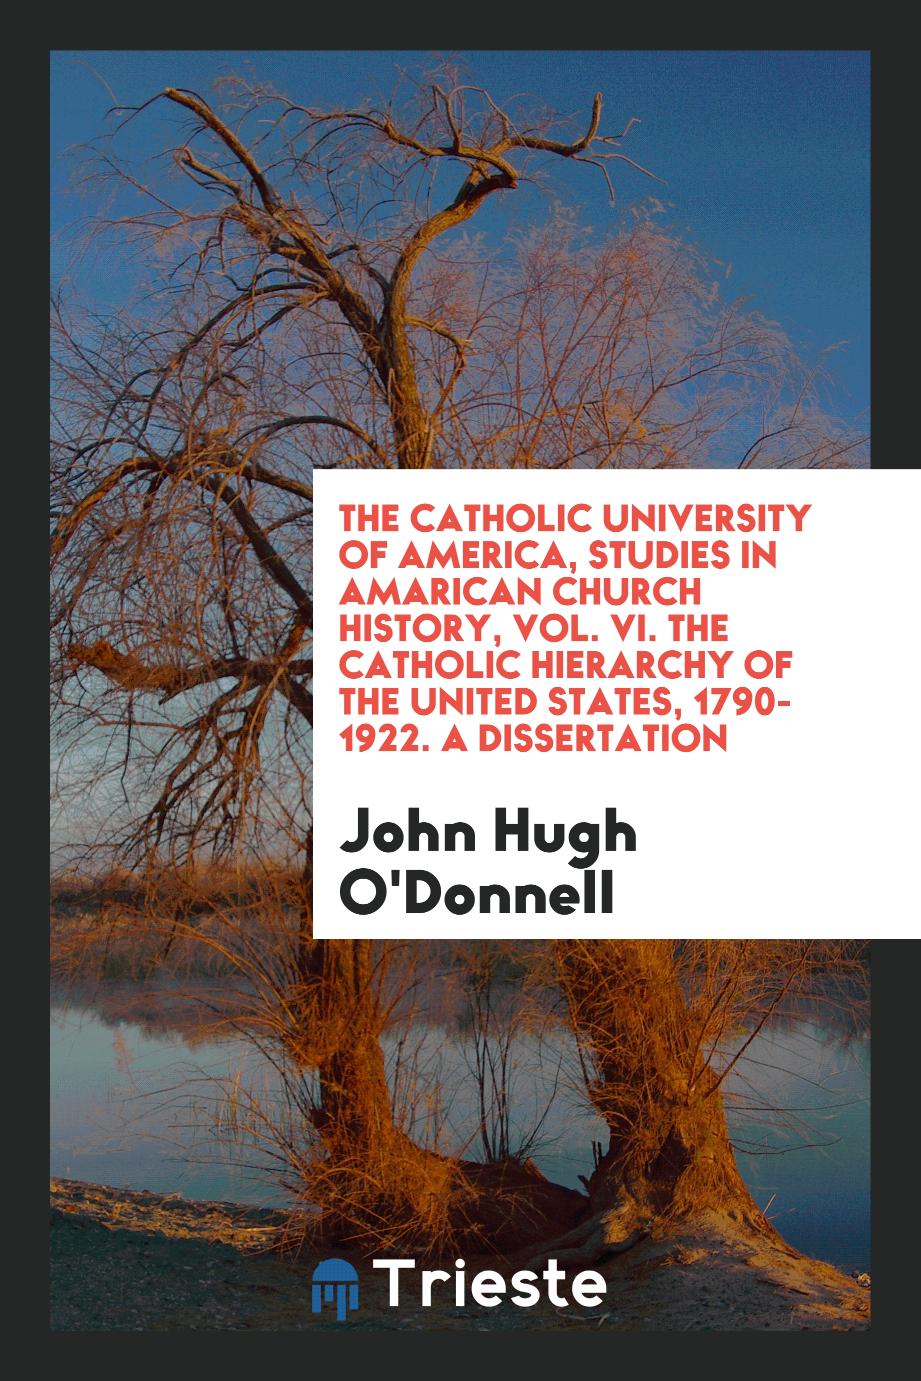 The Catholic University of America, studies in Amarican Church history, Vol. VI. The Catholic hierarchy of the United States, 1790-1922. A dissertation